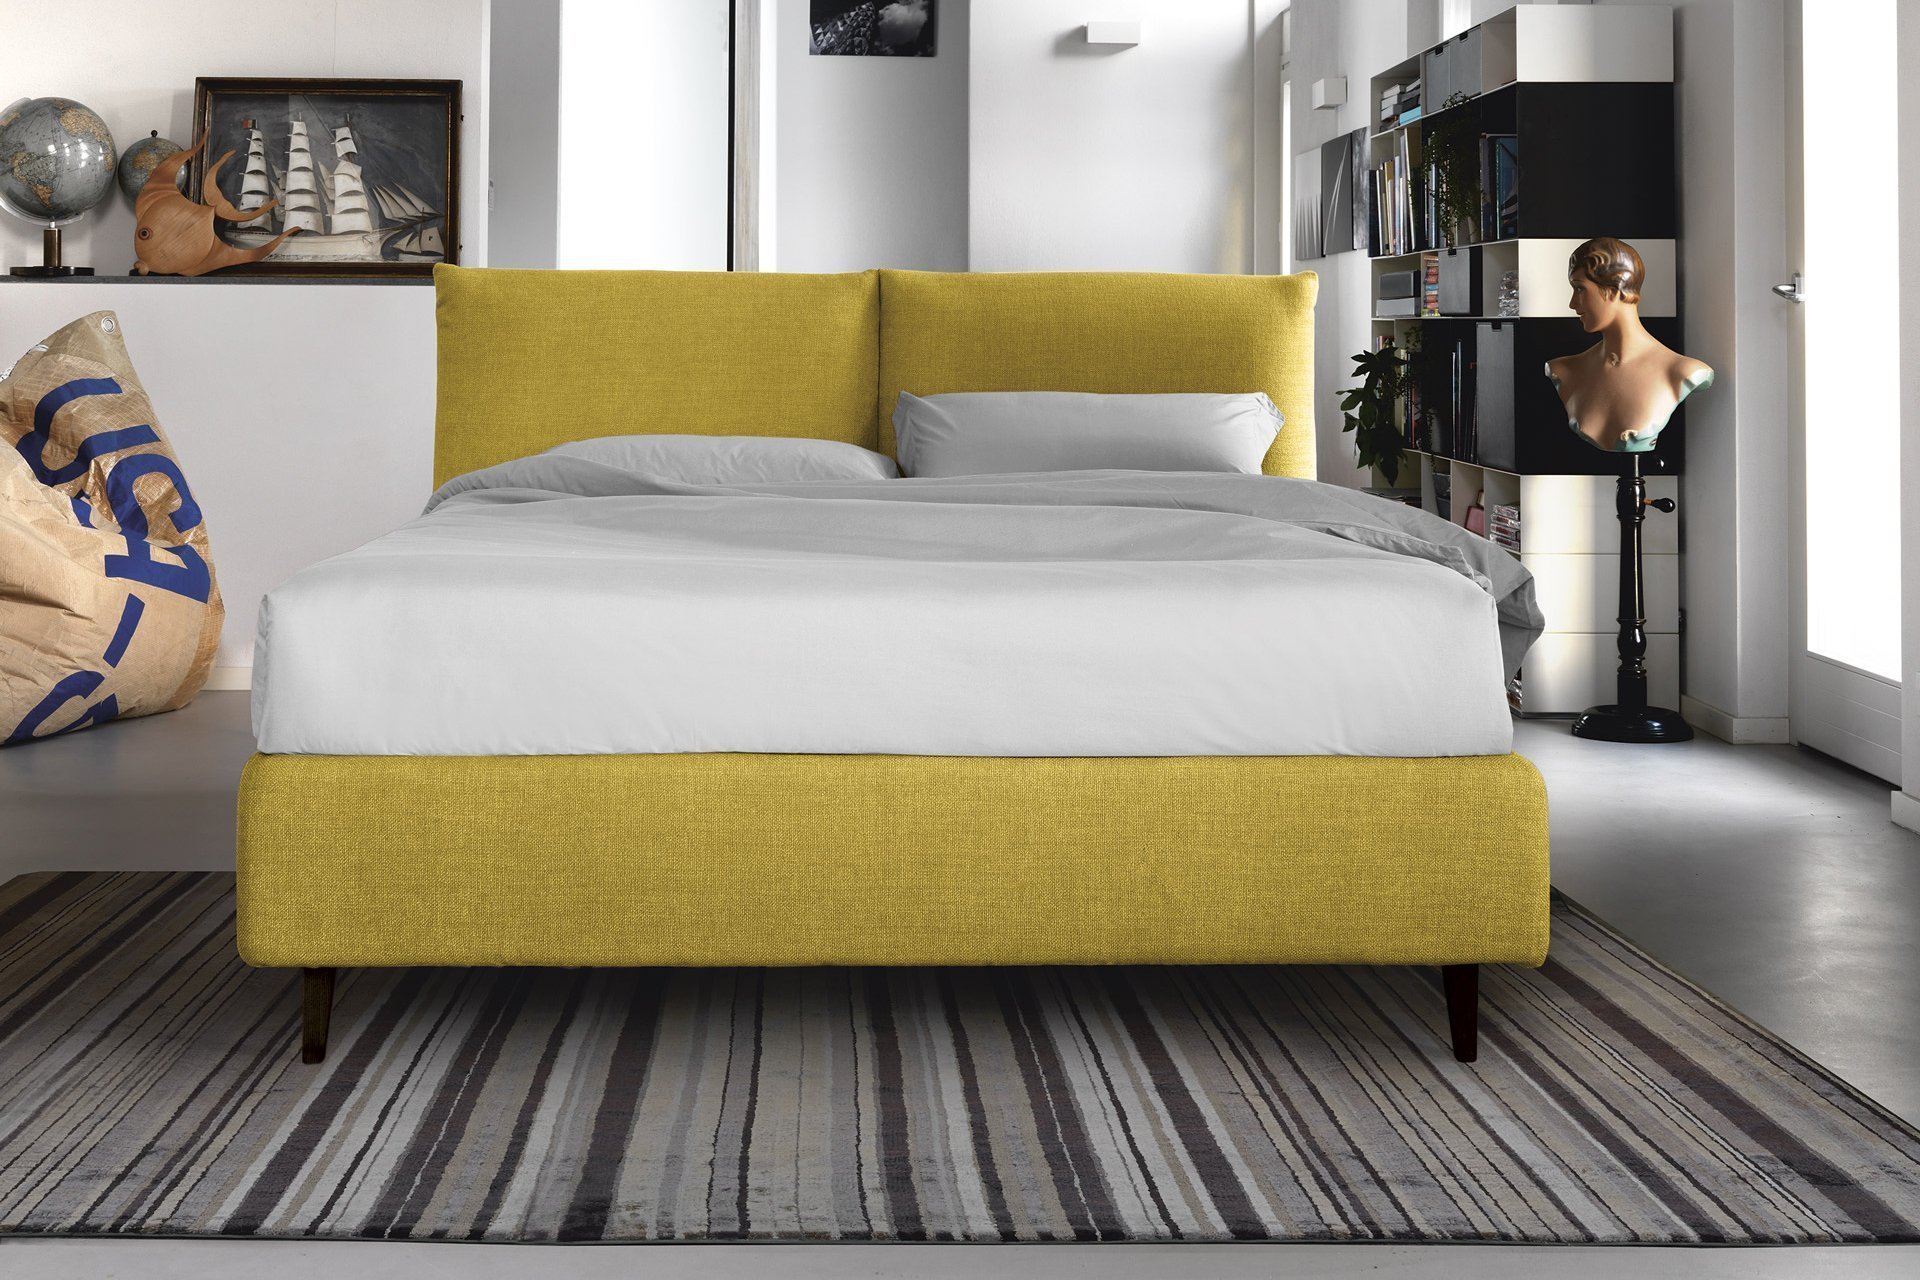 Noctis beds bedroom furniture italian cyprus Takis Angelides Furnihome beds with storage